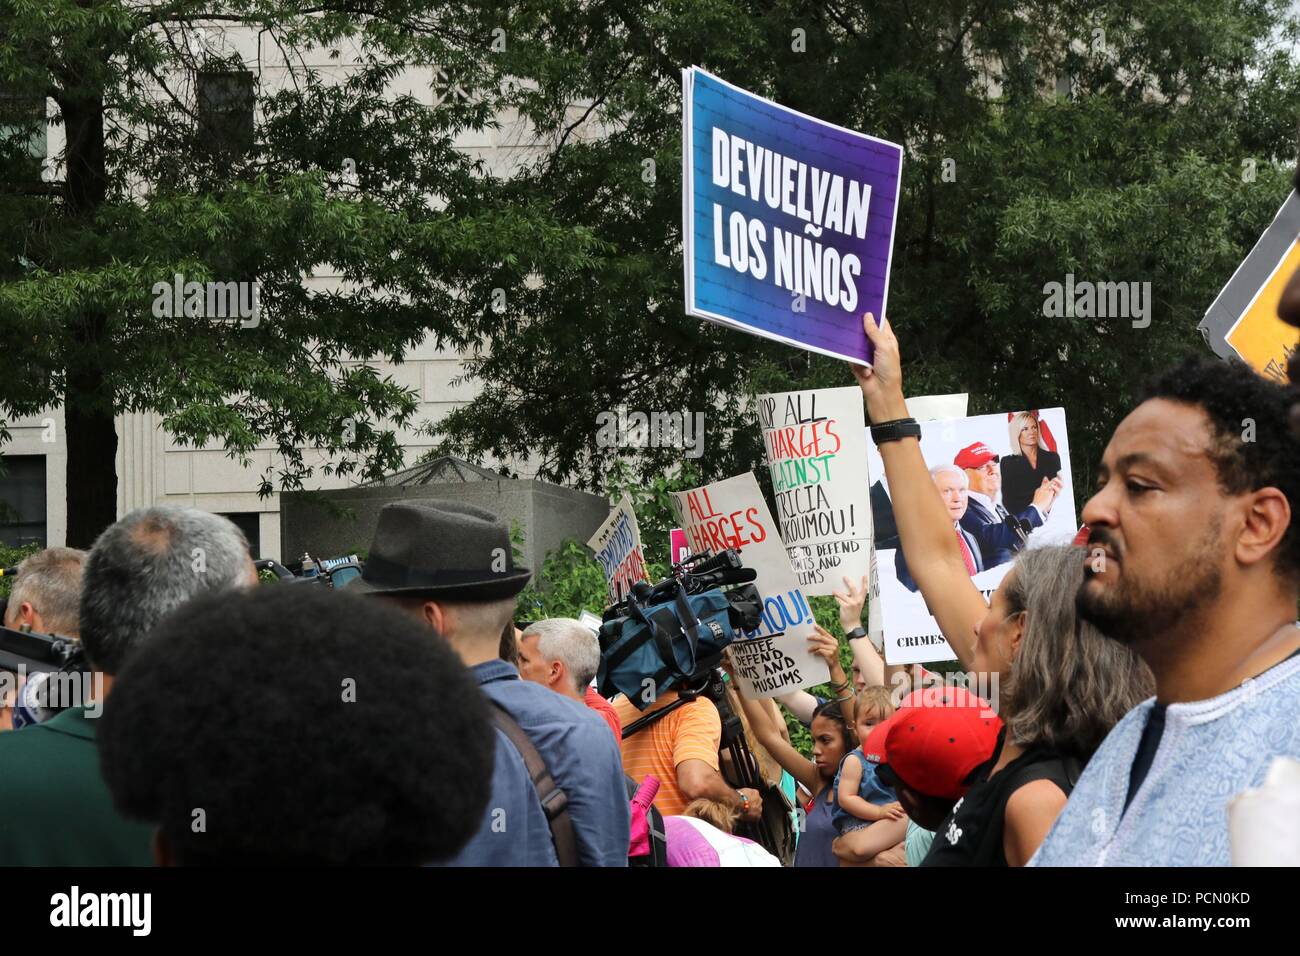 New York, NY USA. O3 Aug, 2018. Supporters of Therese Patricia Okoumou, 44, the woman who was arrested on 4th. July, 2018, after  after she climbed onto the base of the Statue of Liberty to protest the Trump administration’s immigration policies, made a procedural court appearance in New York City on 3 Aug, 2018. The ‘Rise and Resist’ activist was  ordered to reappear in court on 1st. October, 2018. © 2018 G. Ronald Lopez/DigiPixsAgain.us/Alamy Live News Stock Photo